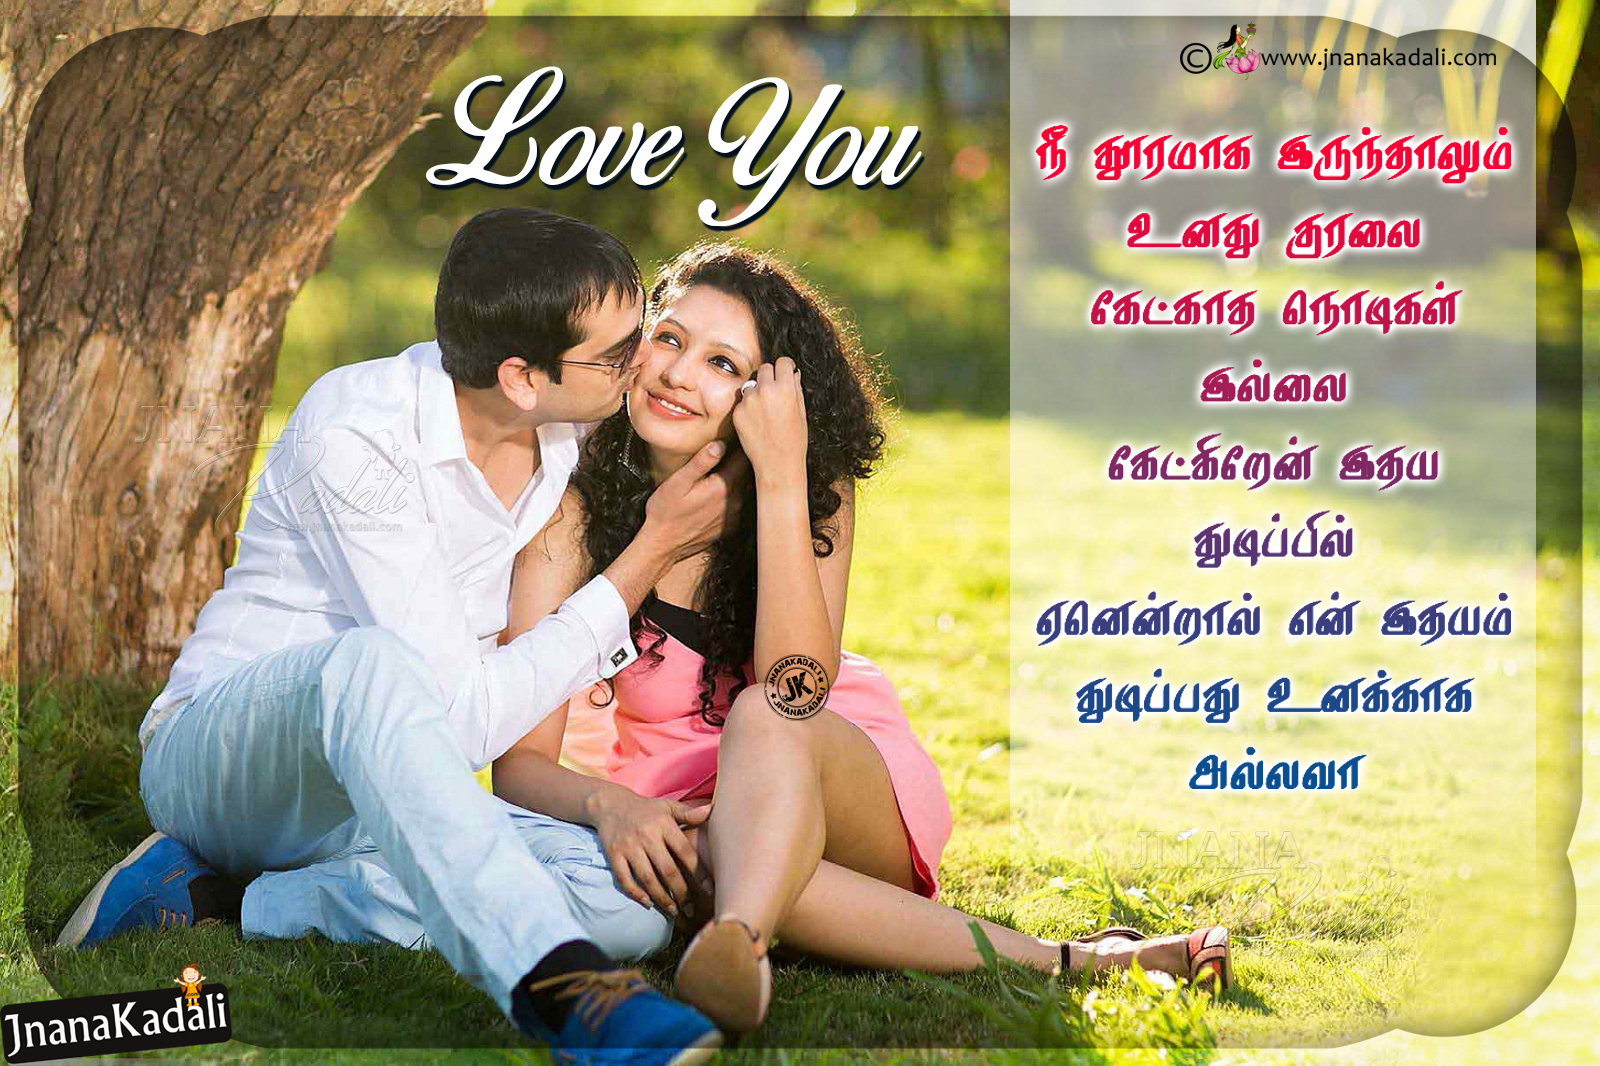 Romantic Love quotes in Tamil-Heart Touching Love Messages in Tamil